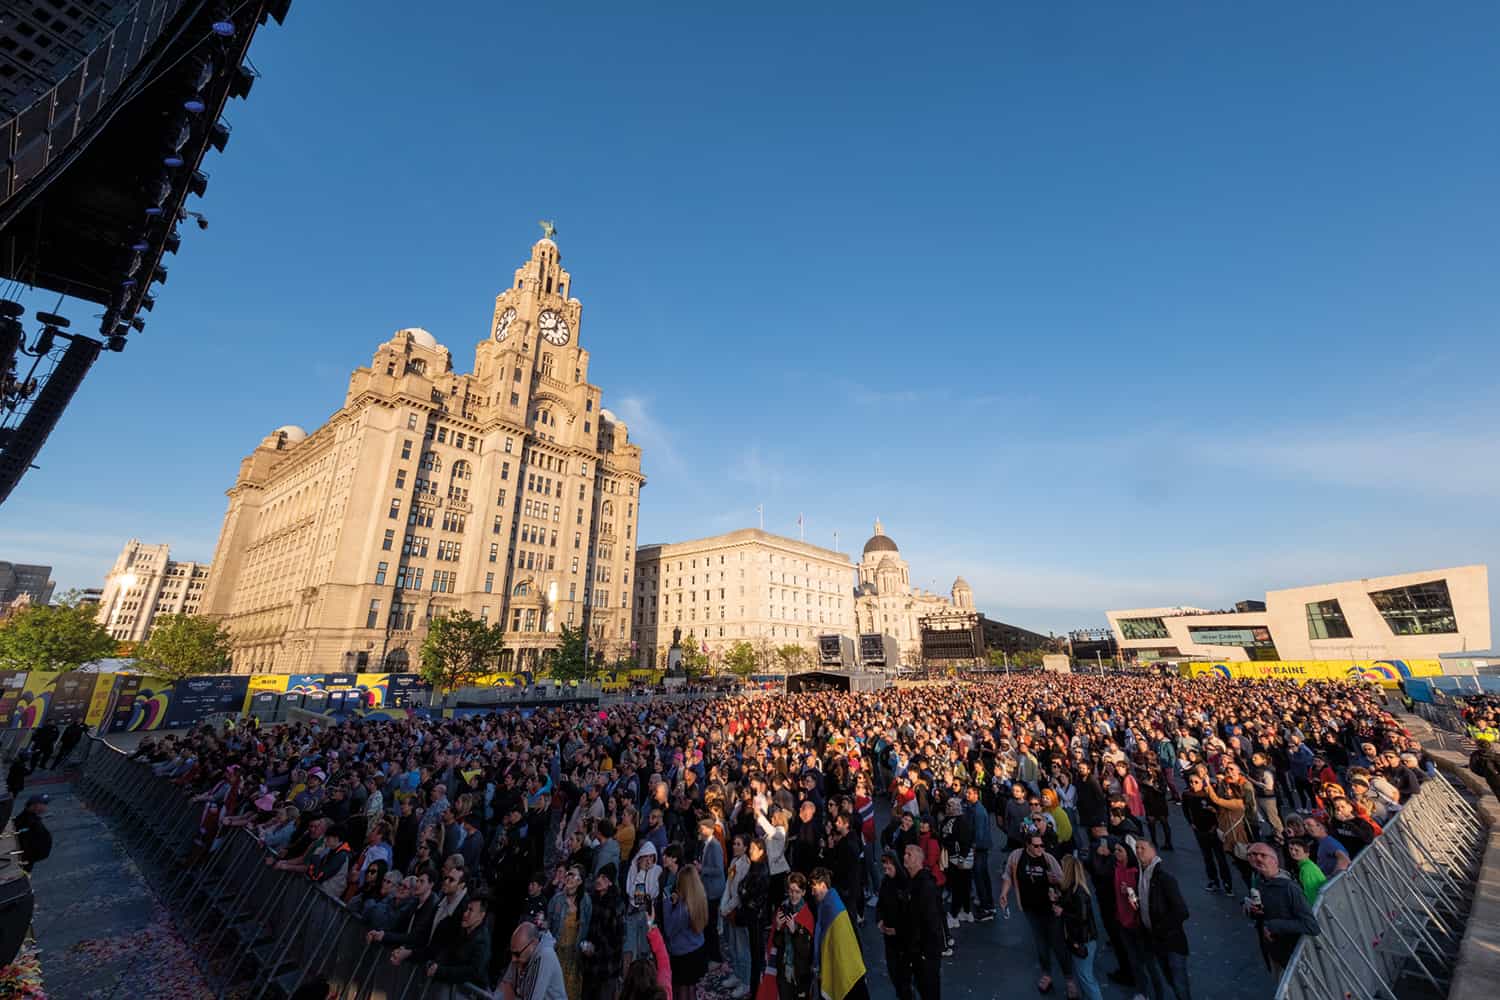 photos of crowds at outdoor events at Eurovision 2023 in Liverpool